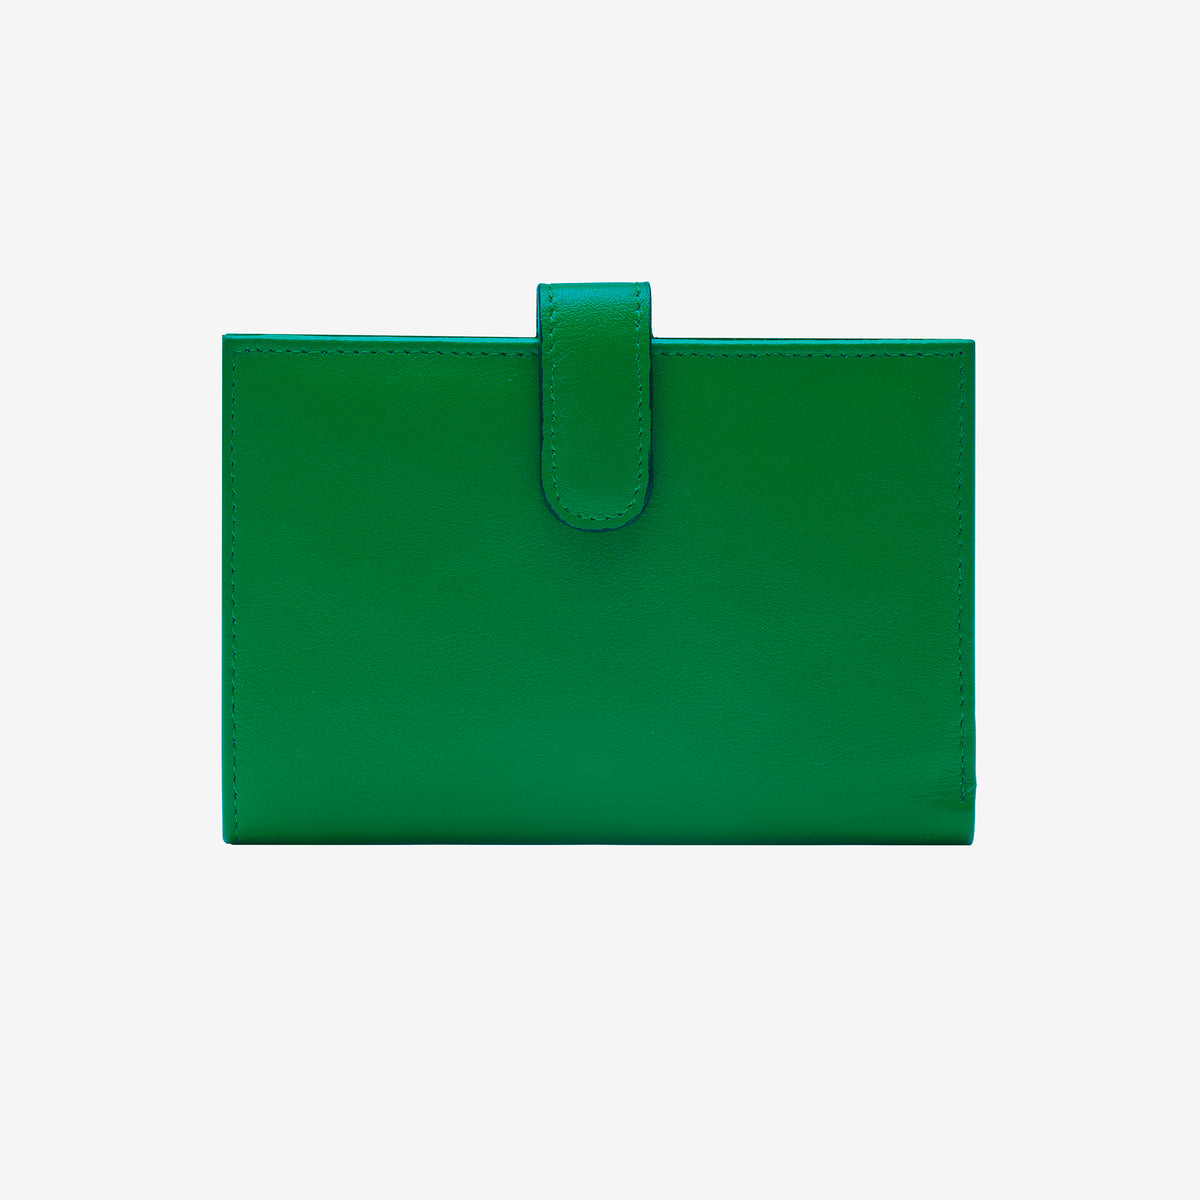 tusk-465-womens-leather-mini-clutch-wallet-emerald-front